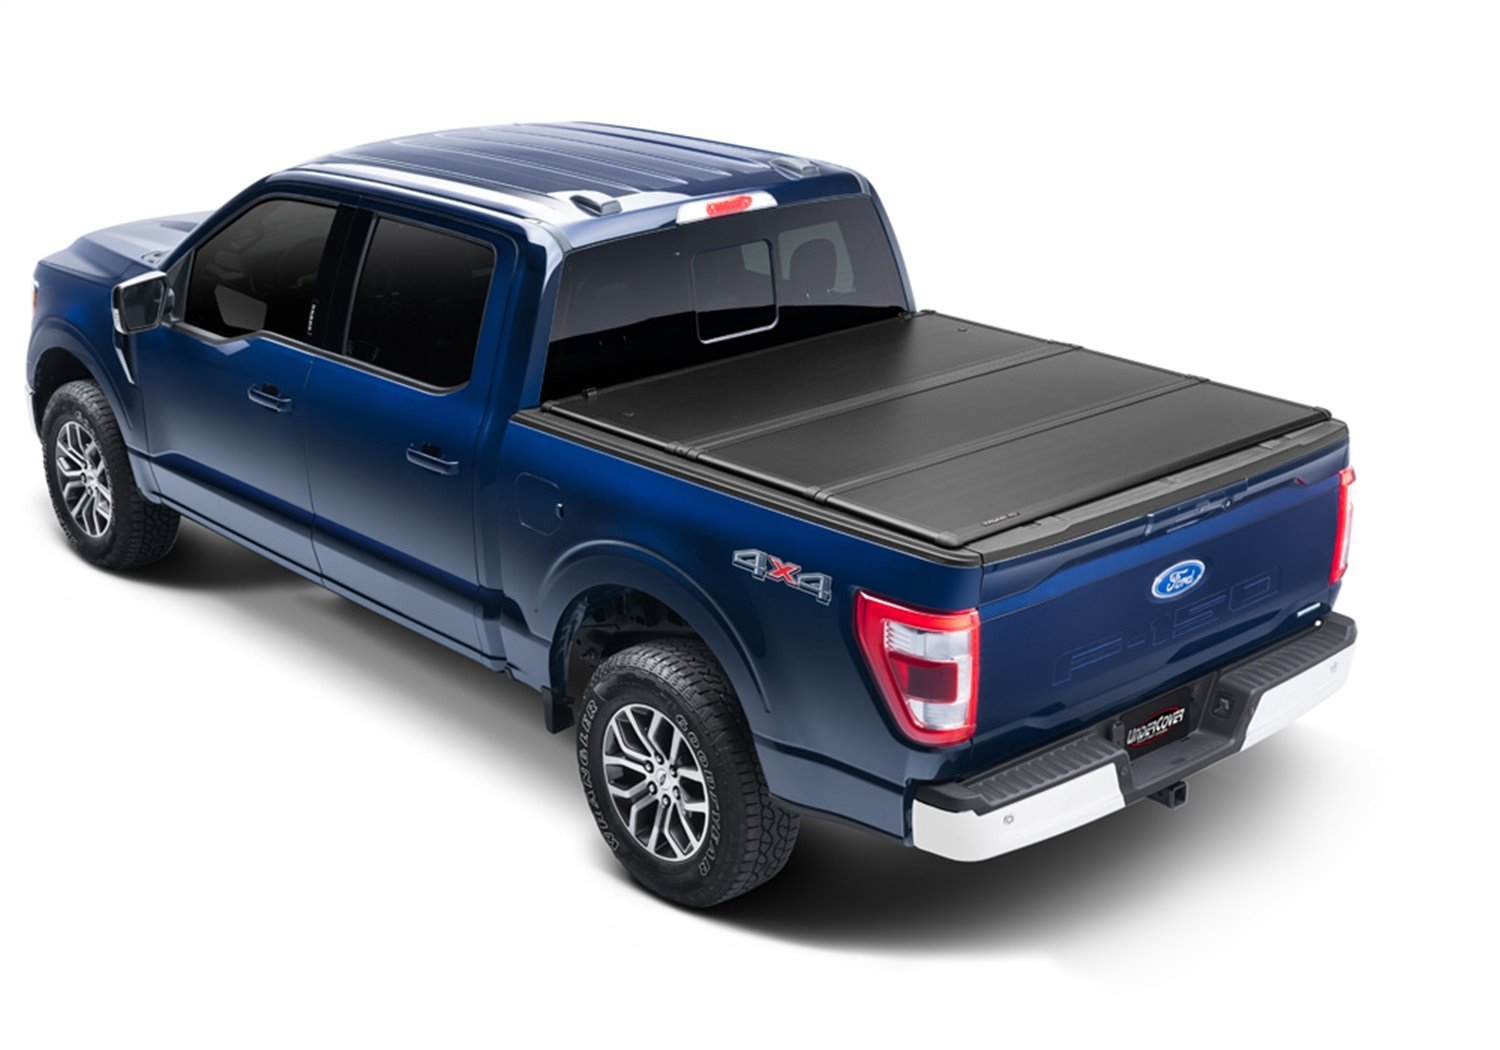 TR26030 Triad Hard Folding Cover, Fits Select Ford F-150 6'7" Bed